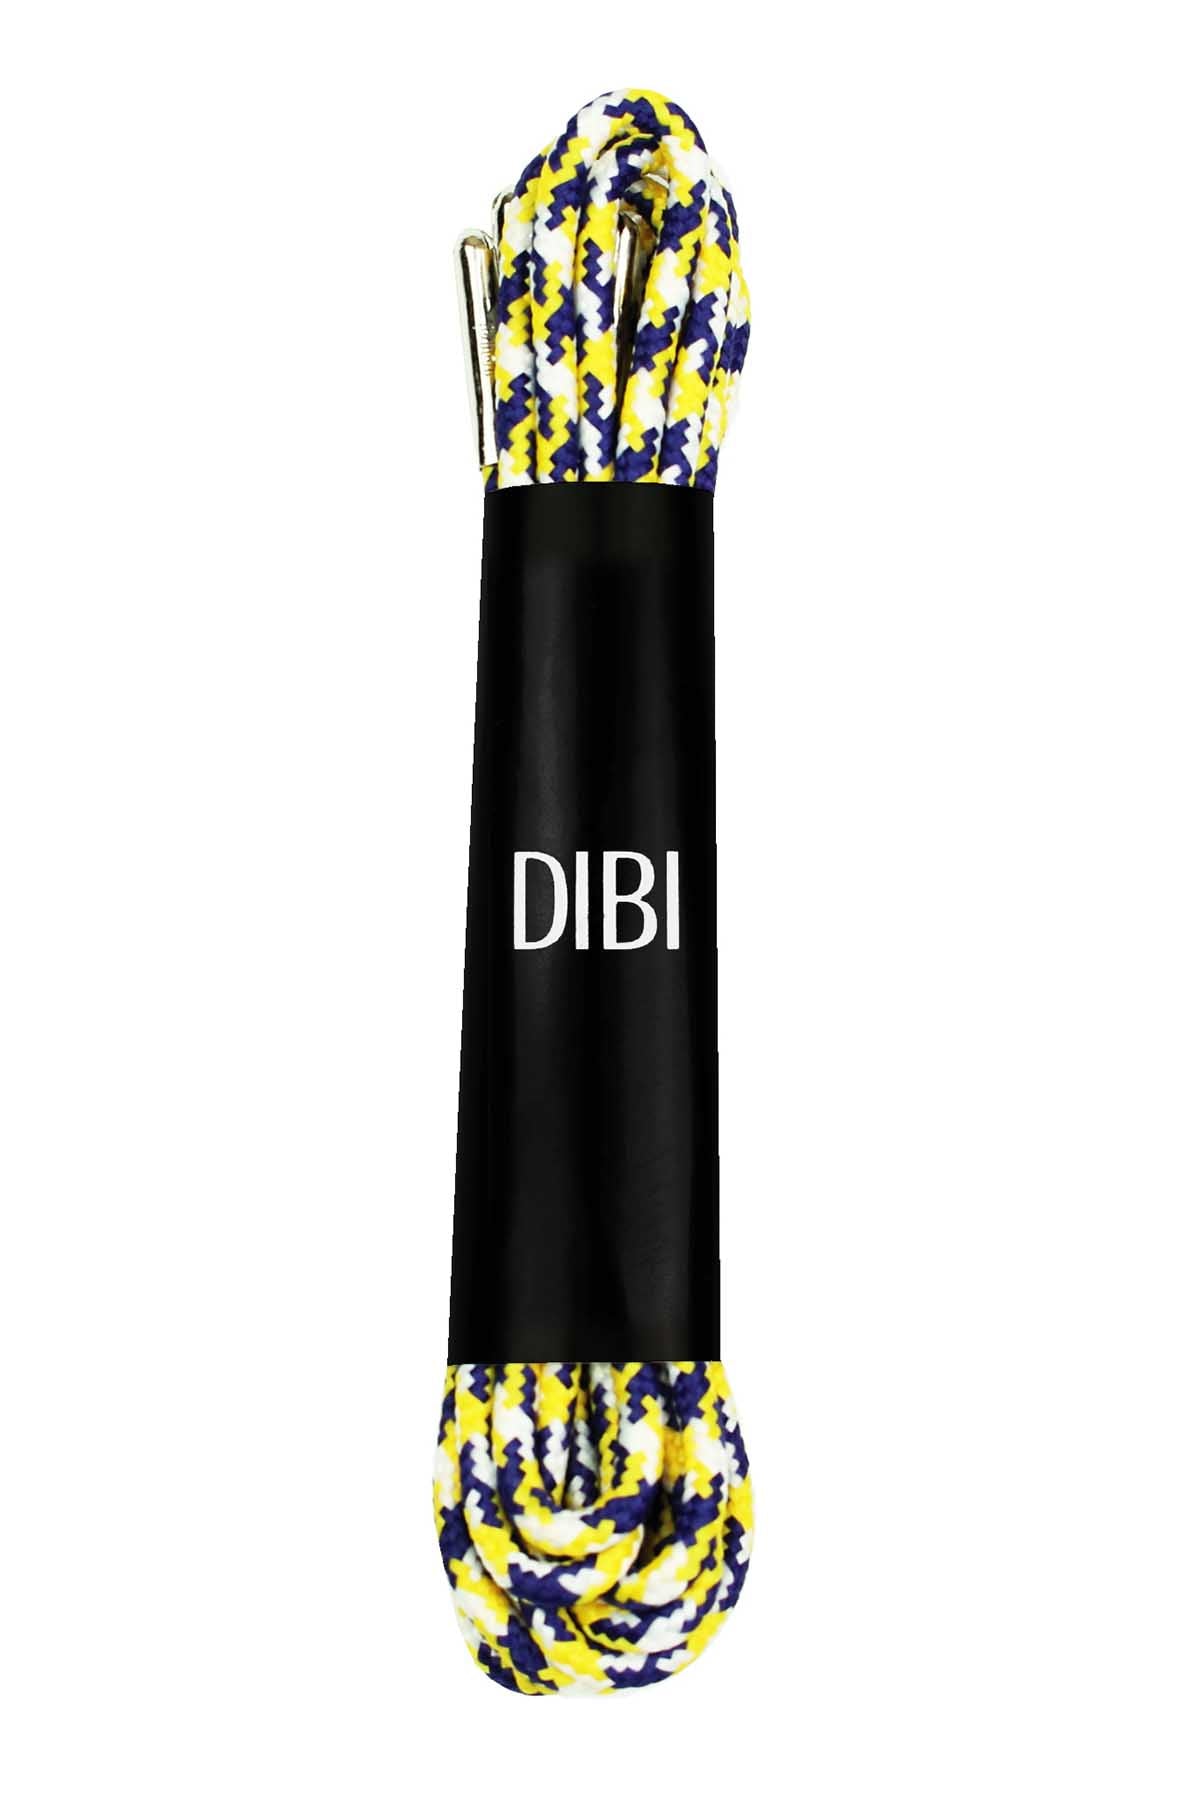 DIBI Navy/Yellow/White Patterned Dress Shoelaces w/ Silver Aglets